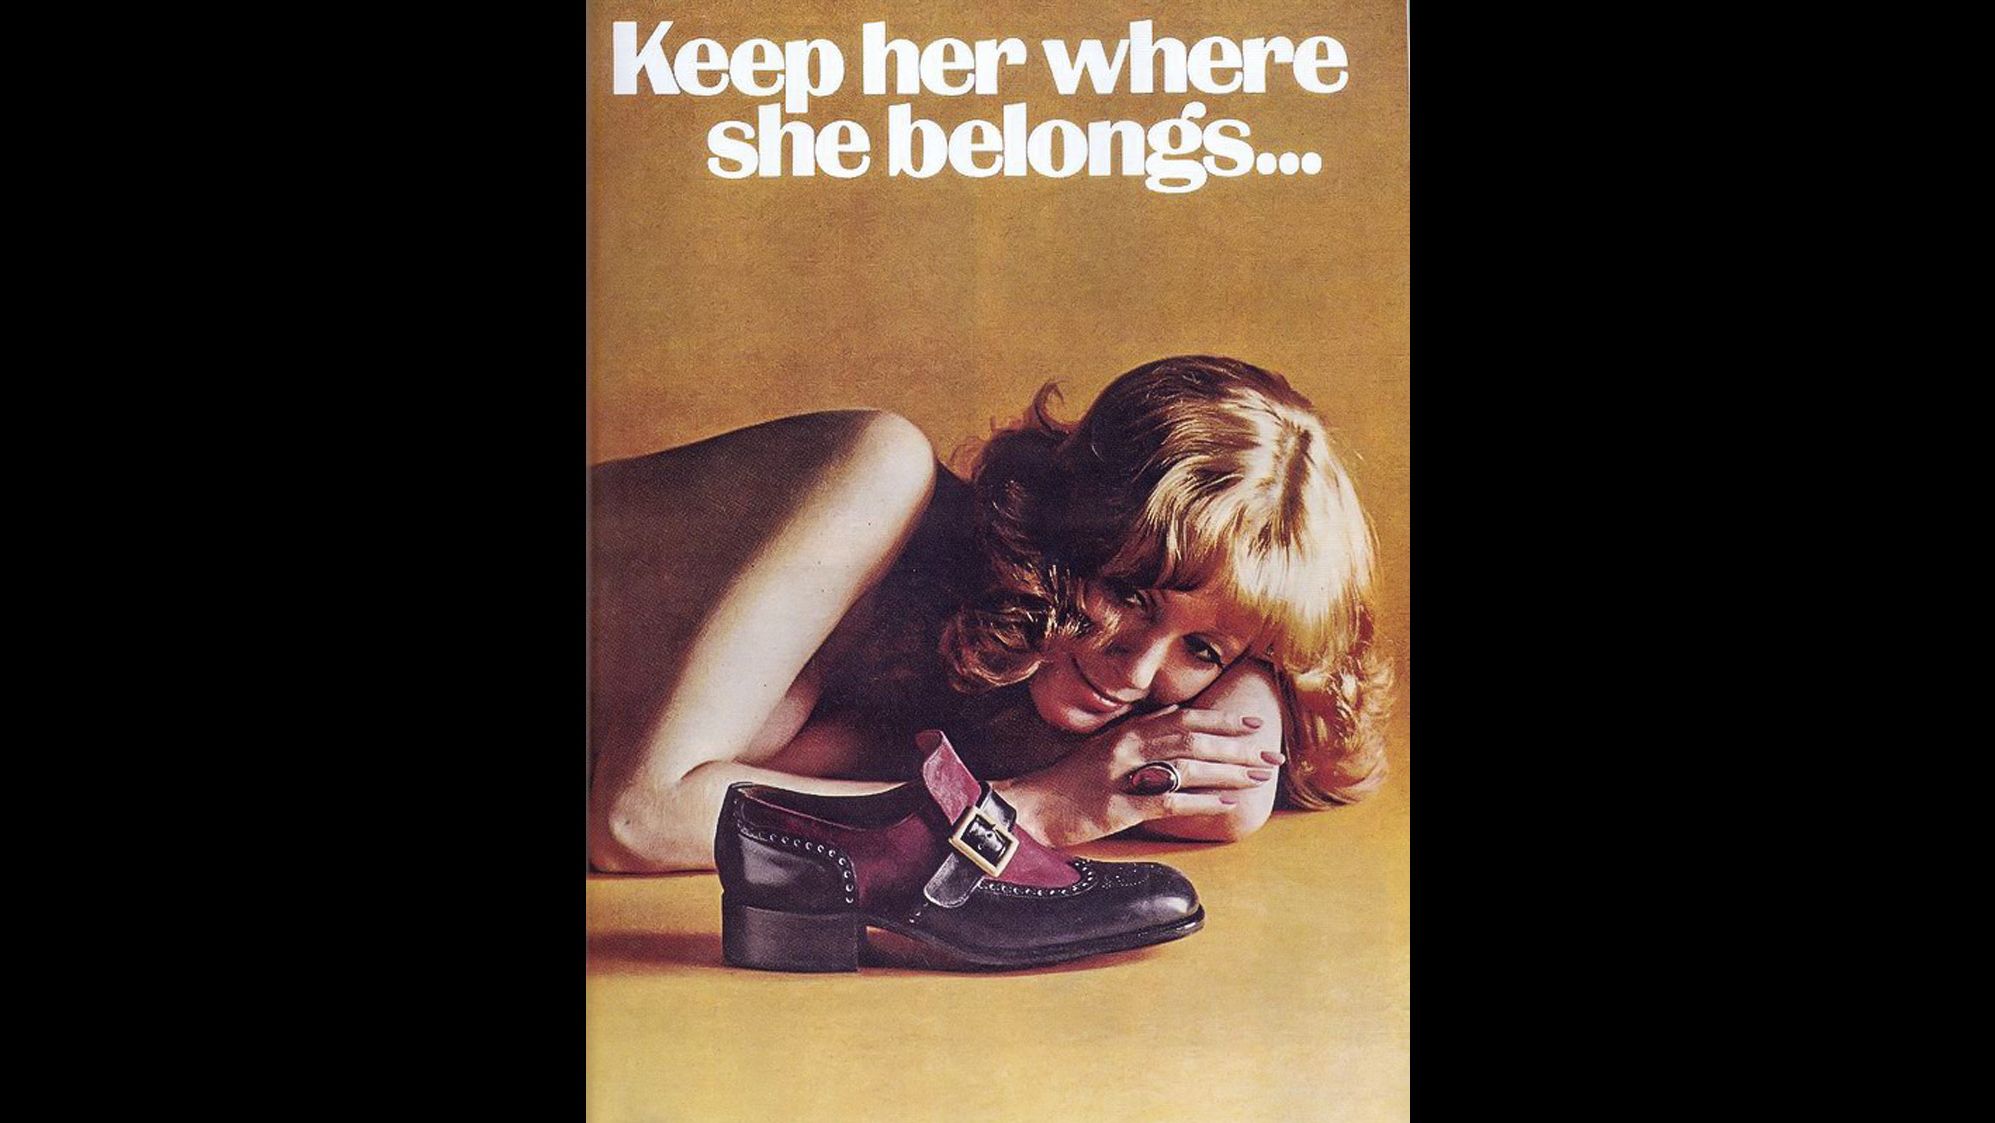 This ad for Weyenberg Massagic shoes was featured in Playboy magazine and reprinted in the "No Comment" section of Ms. magazine in December 1974.